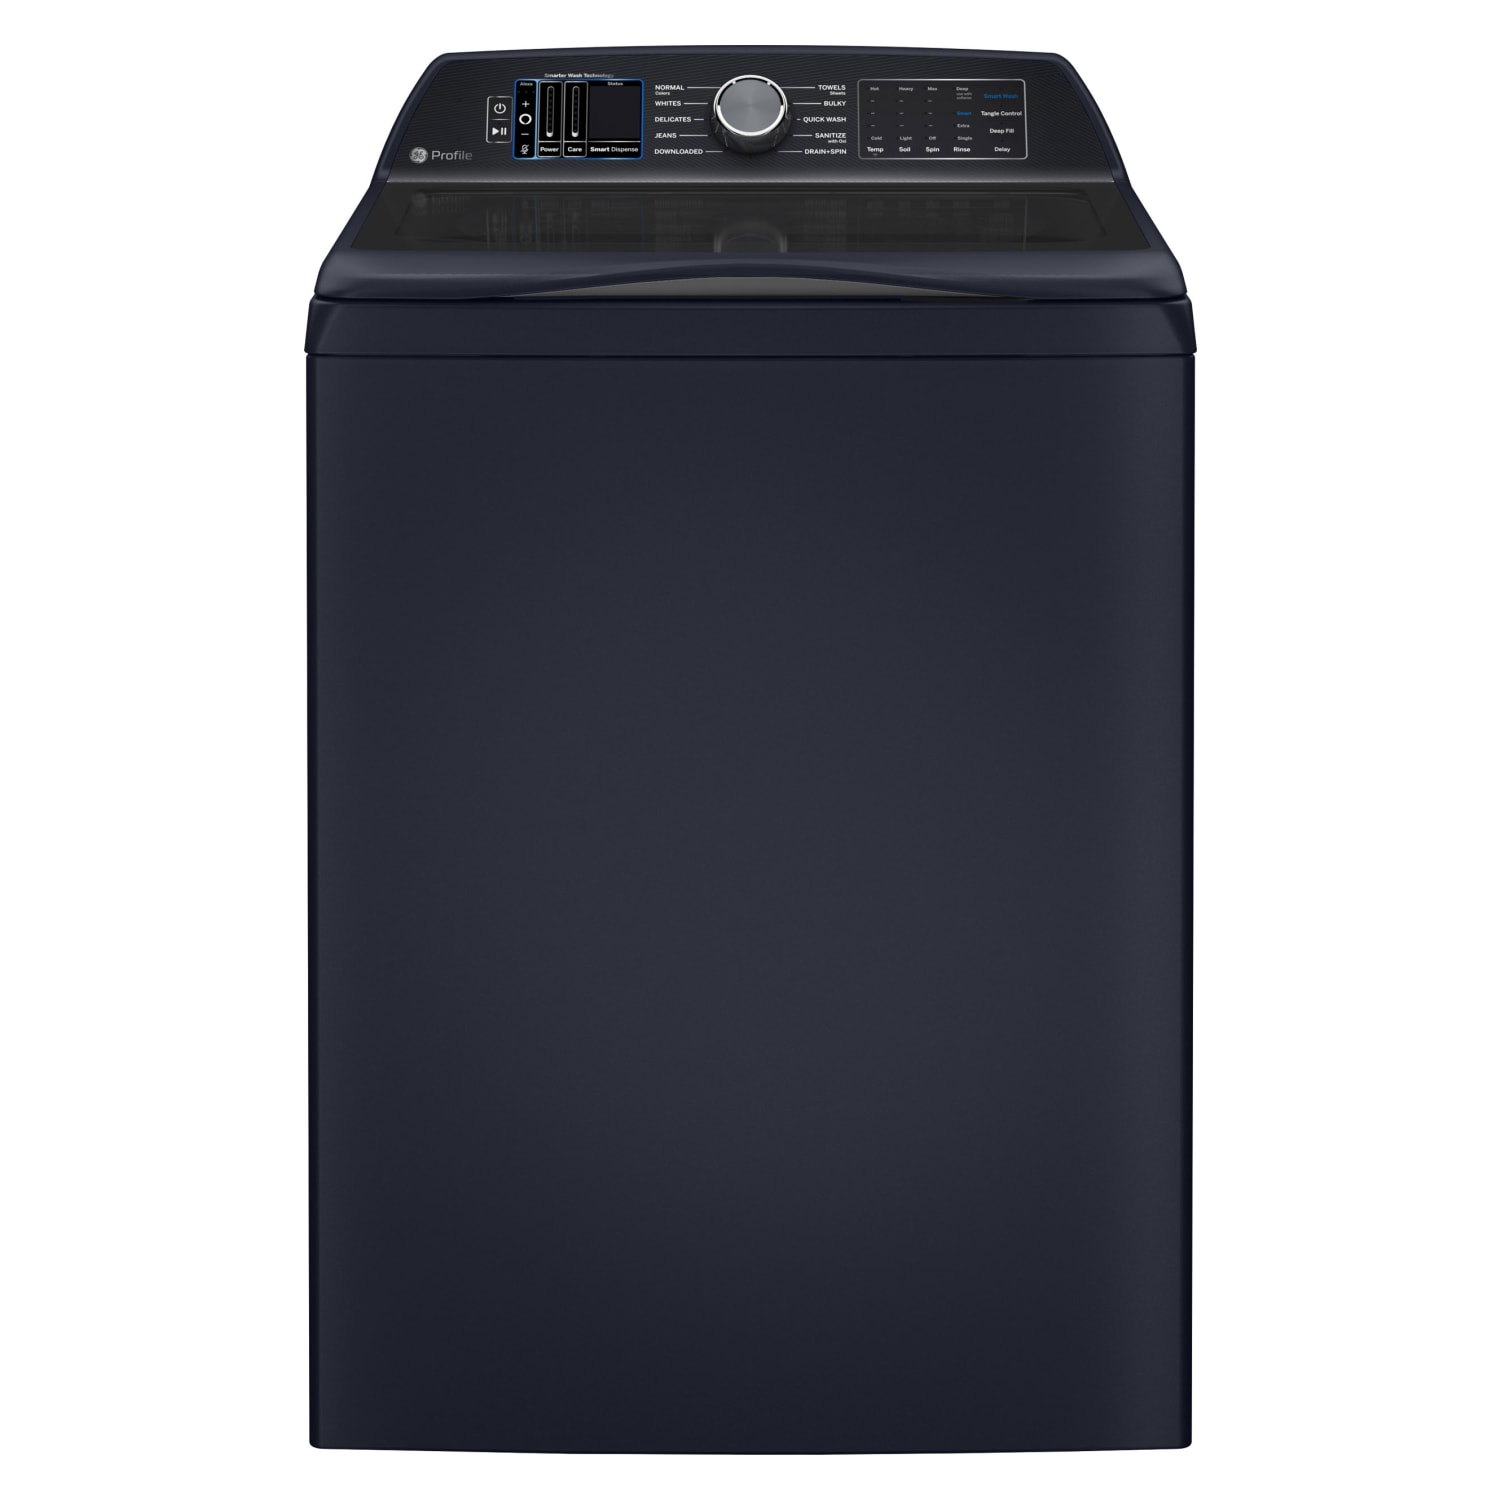 GE Profile™ 5.3 cu. ft. Capacity Washer with Smarter Wash Technology and FlexDispense™ - PTW905BPTRS